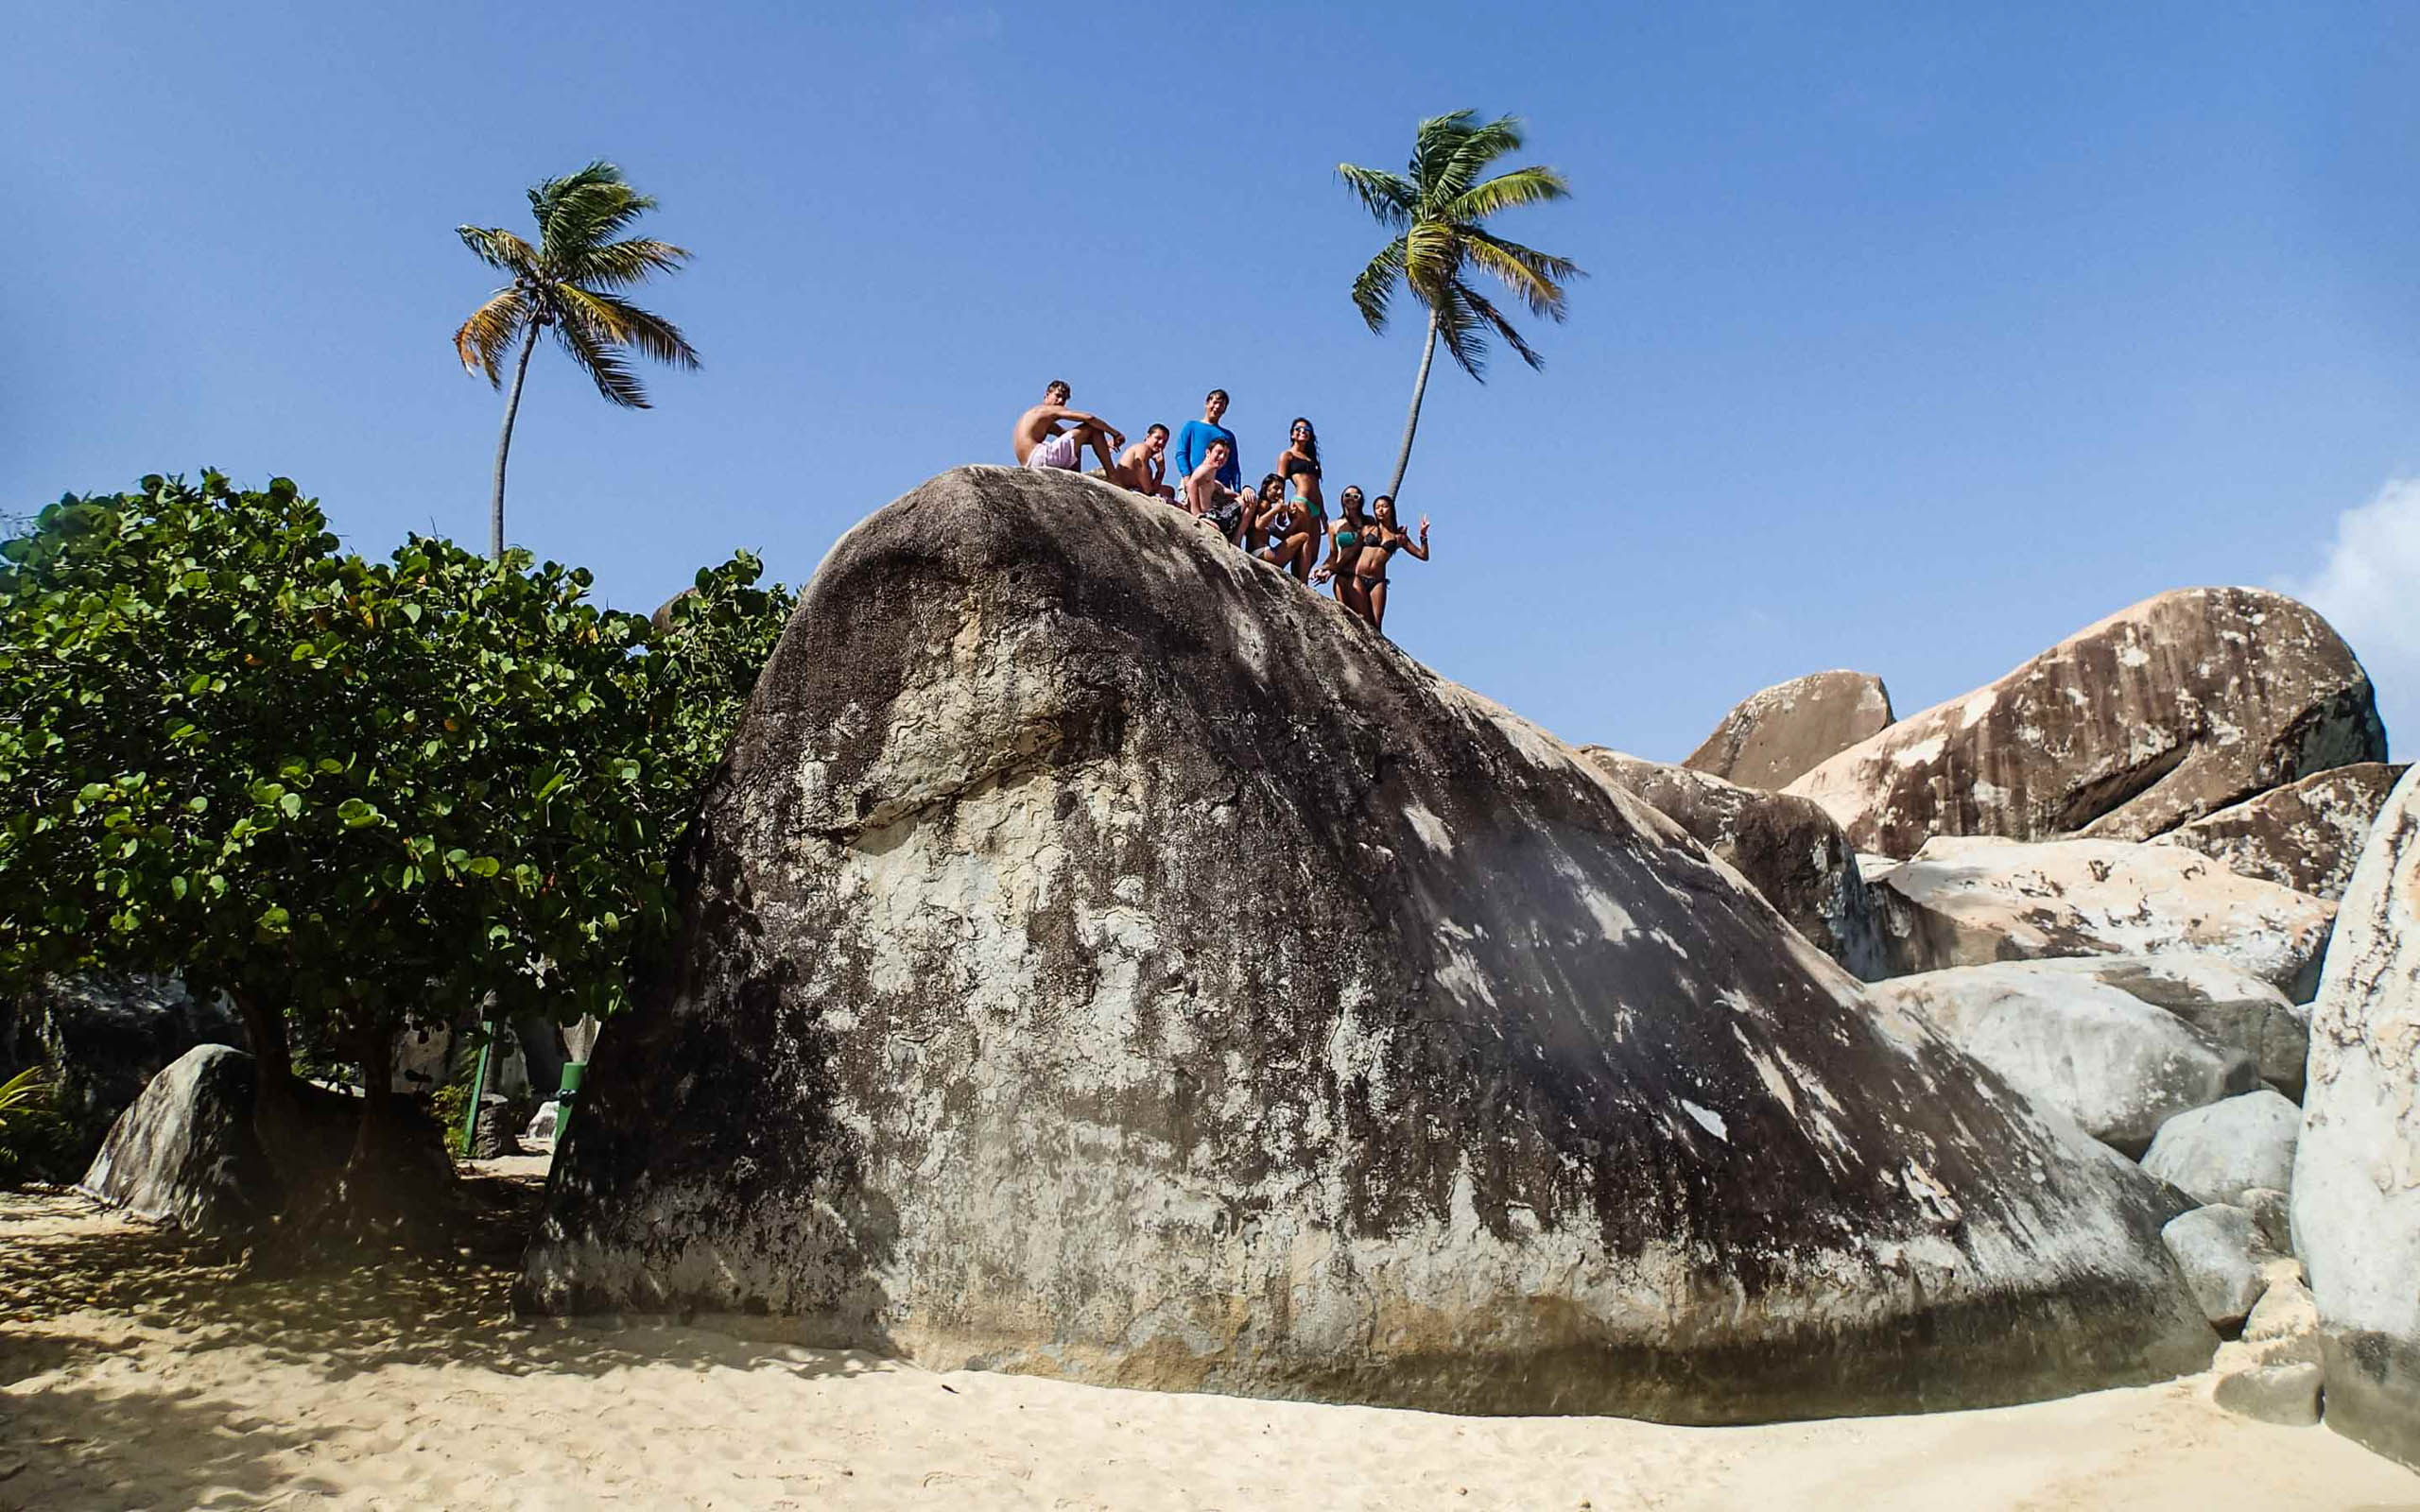 A group of people standing on top of a large rock.